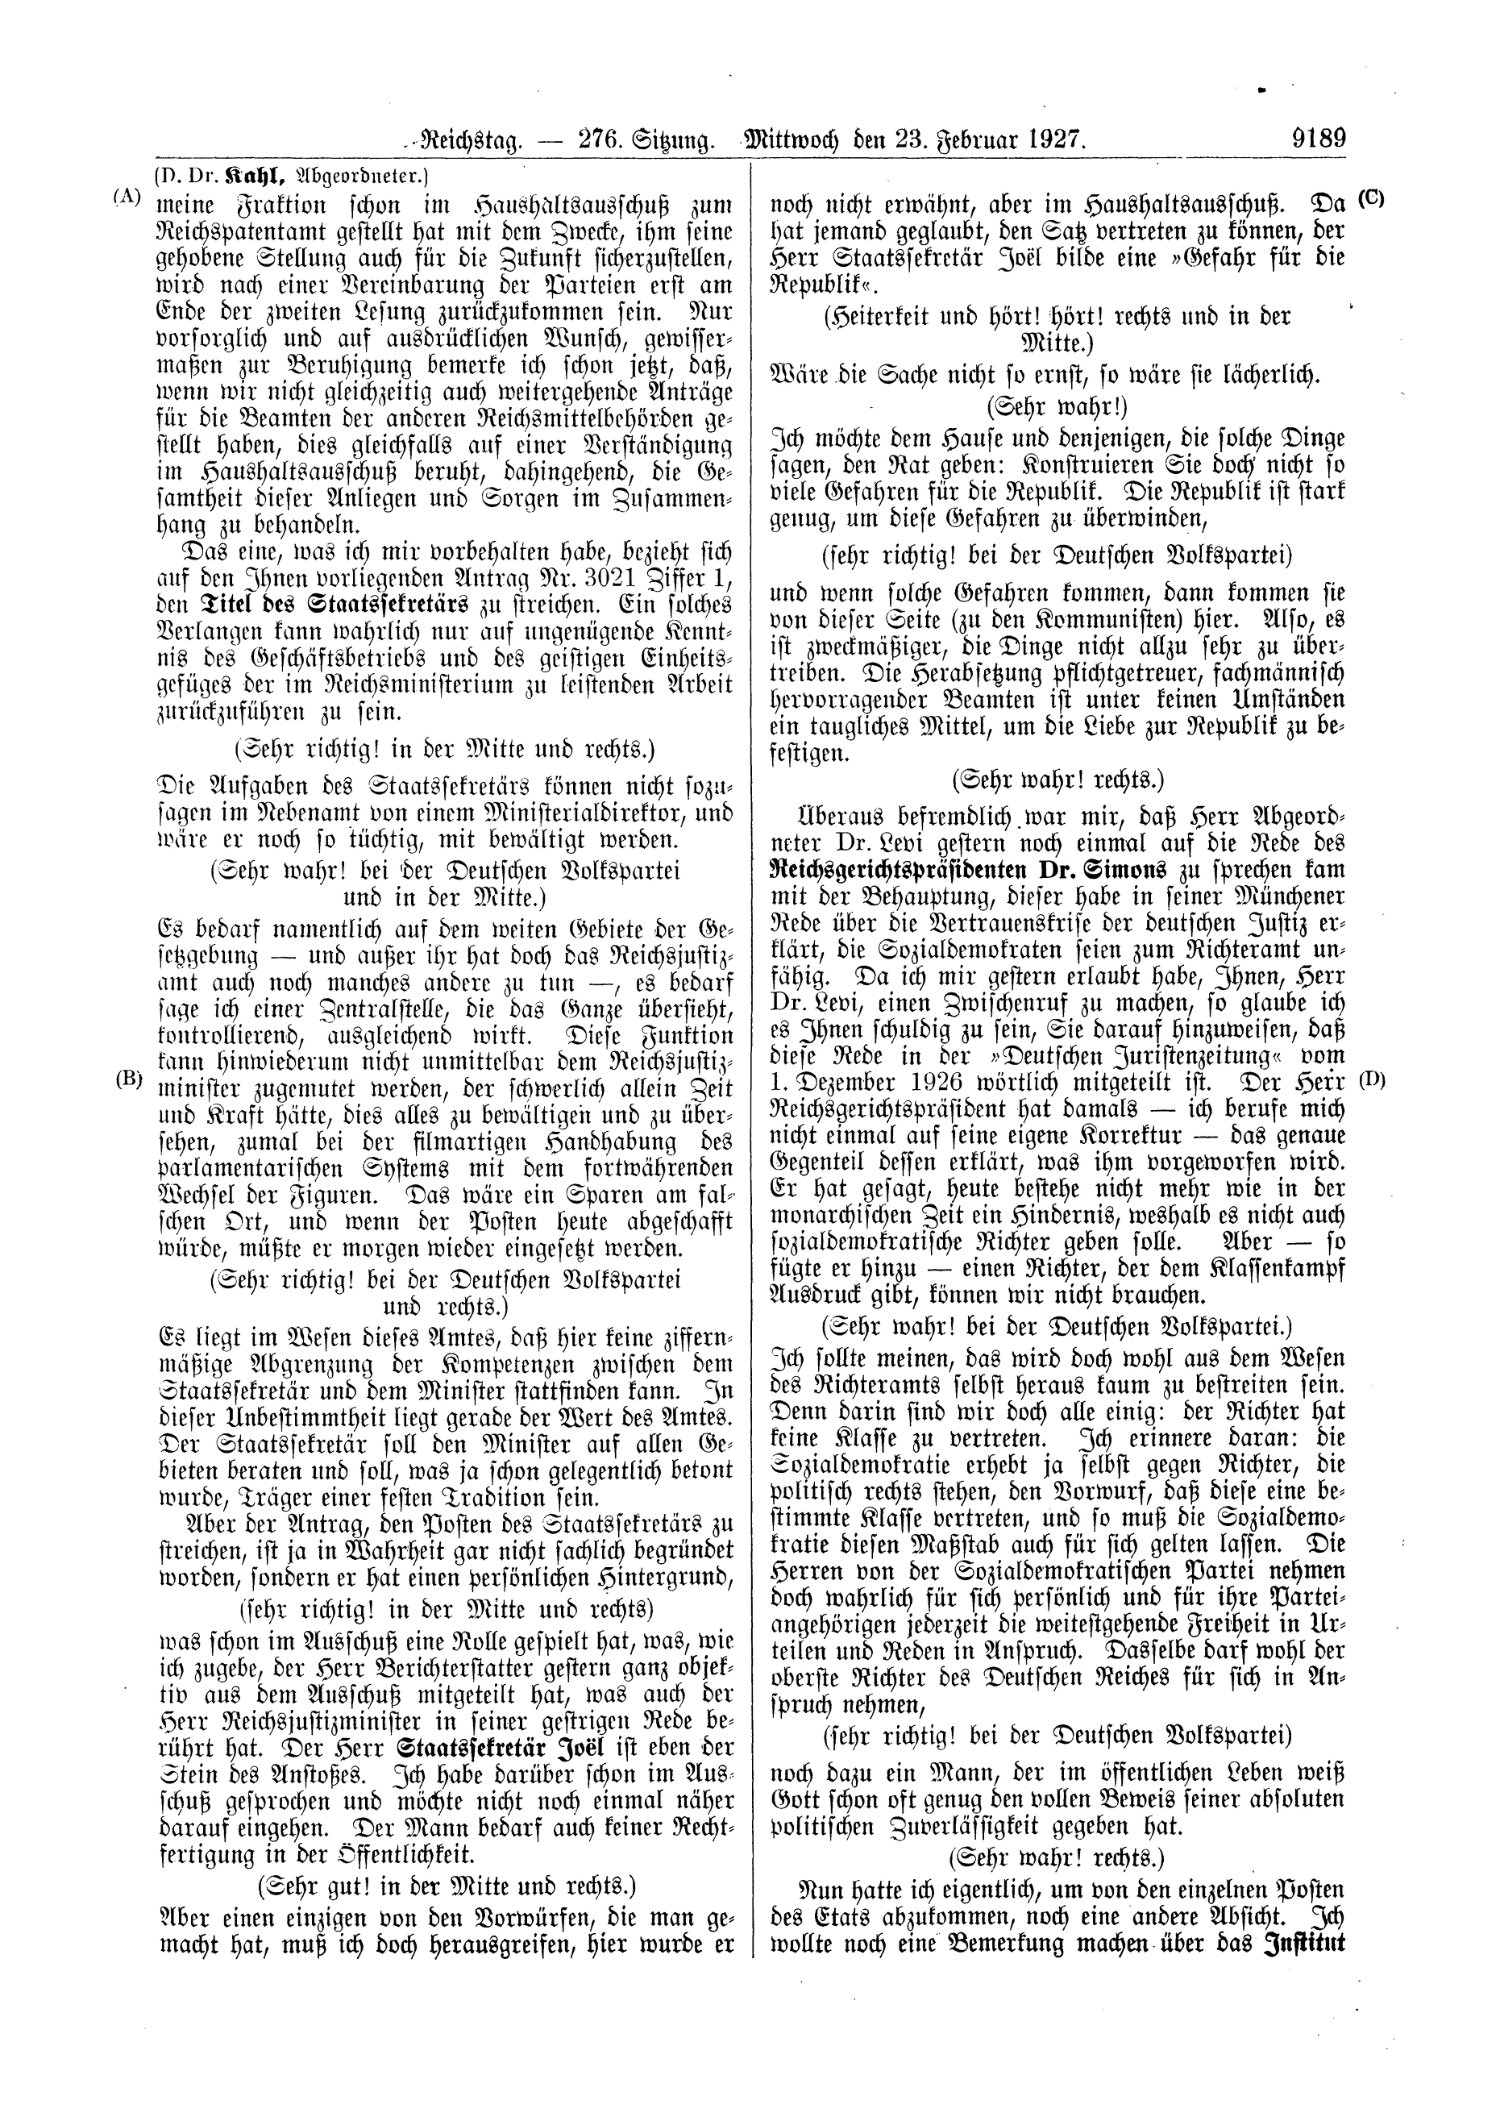 Scan of page 9189